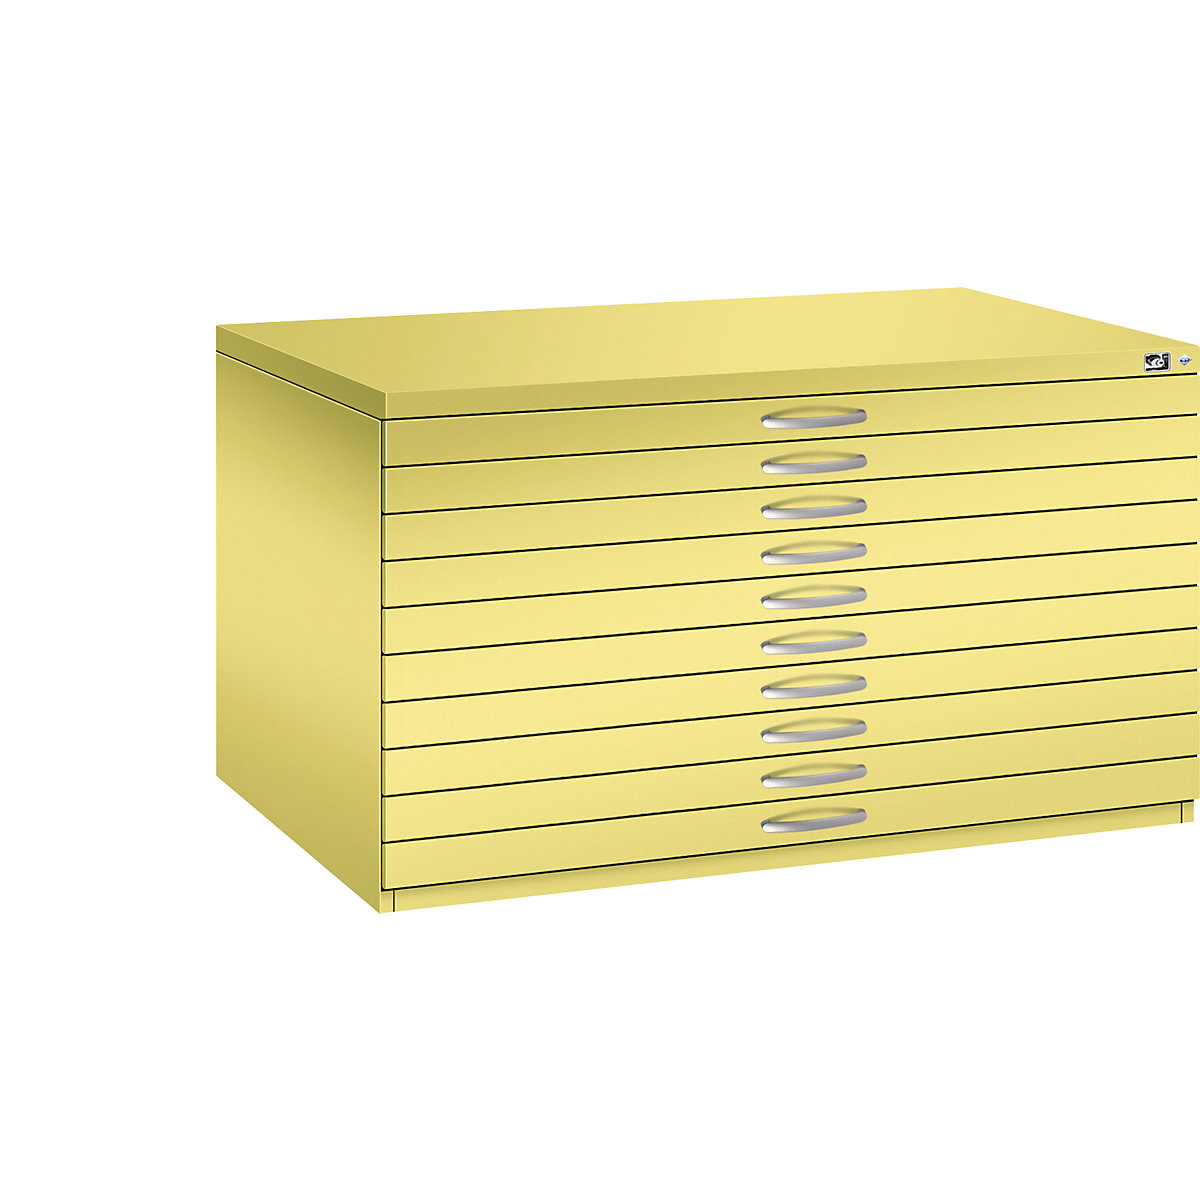 Drawing cabinet – C+P, A0, 10 drawers, height 760 mm, sulphur yellow-23